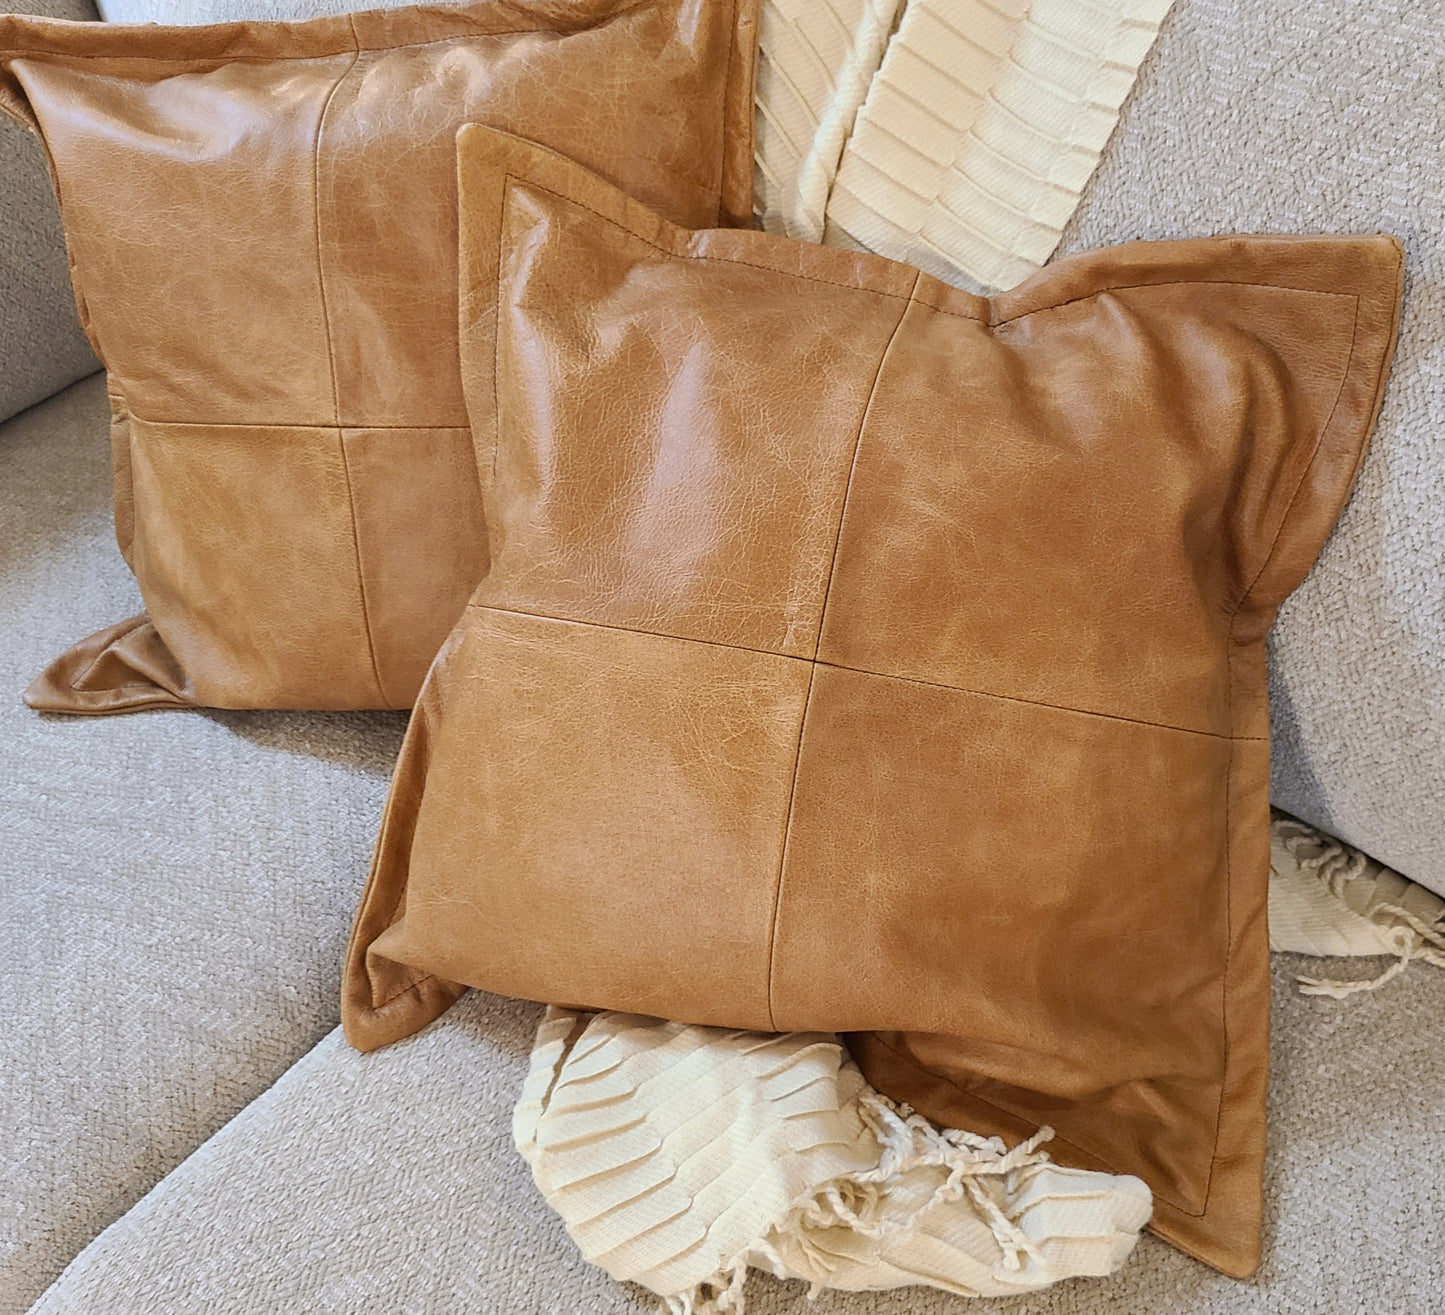 100% Lambskin Leather Caramel Brown Throw Pillow Cover - 16 x 16-Status Co. Leather Studio